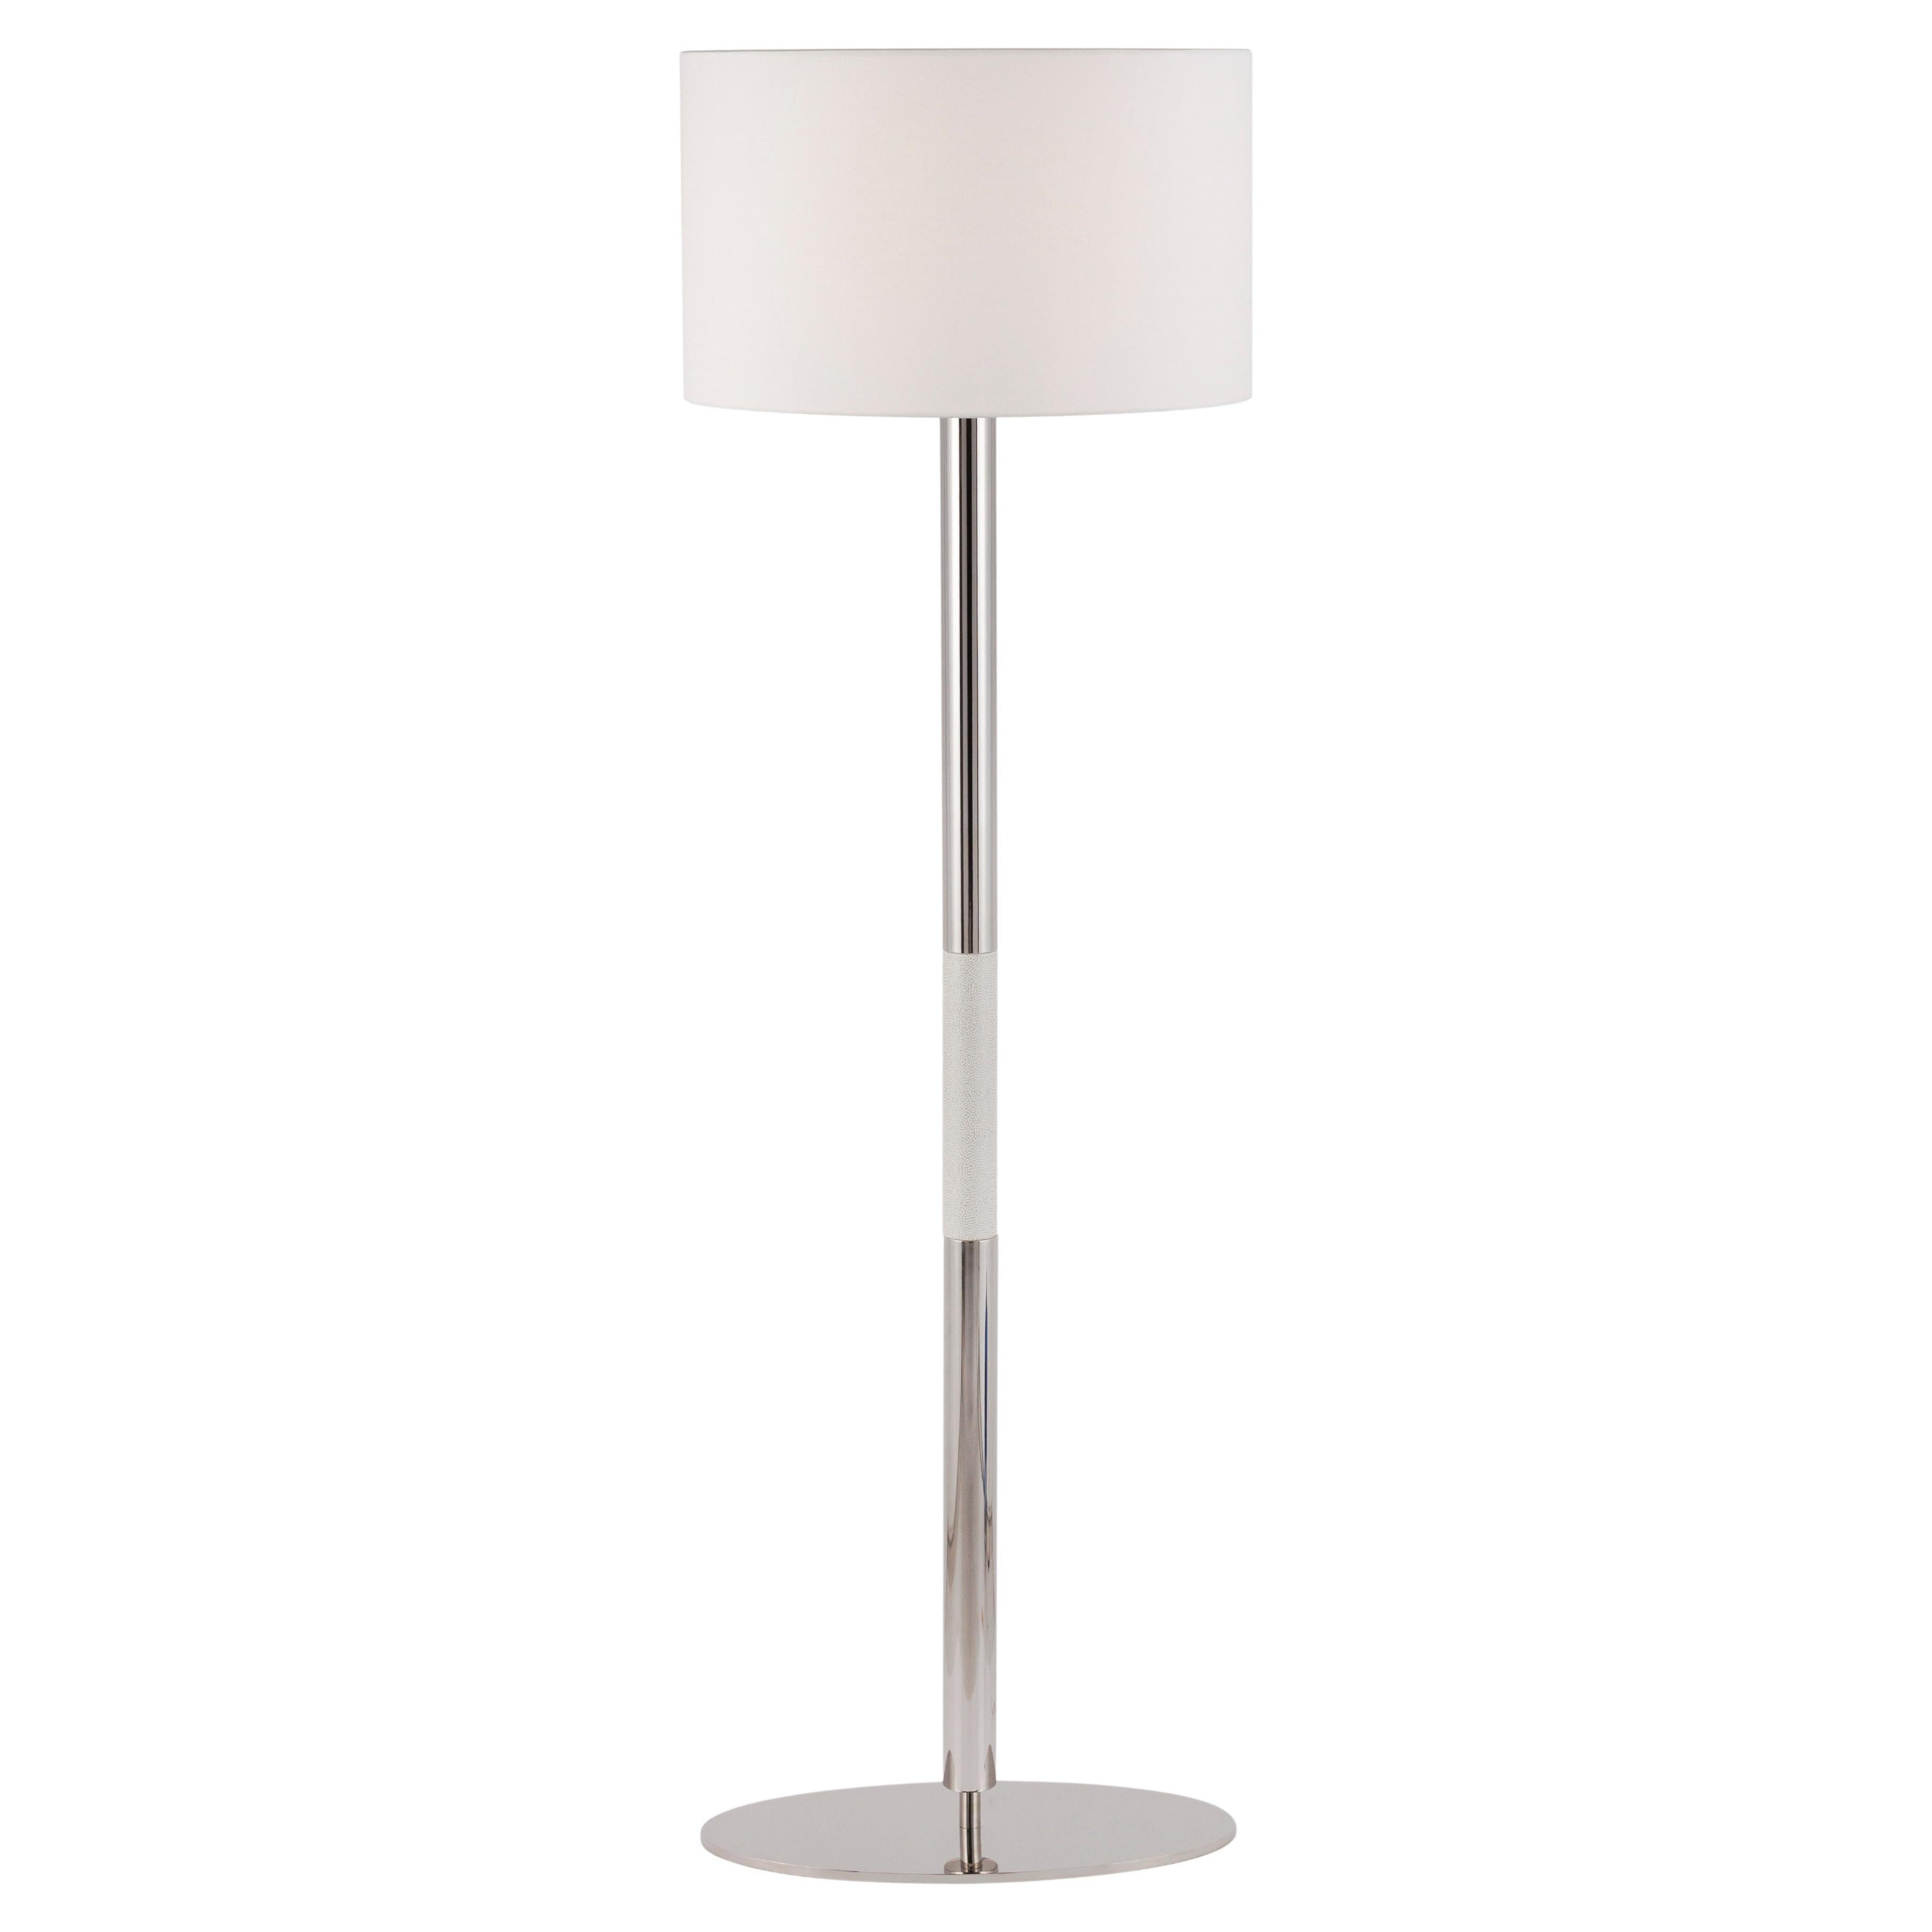 Modern Champagne Gau Floor Lamp Faux Leather Handmade in Portugal by Greenapple